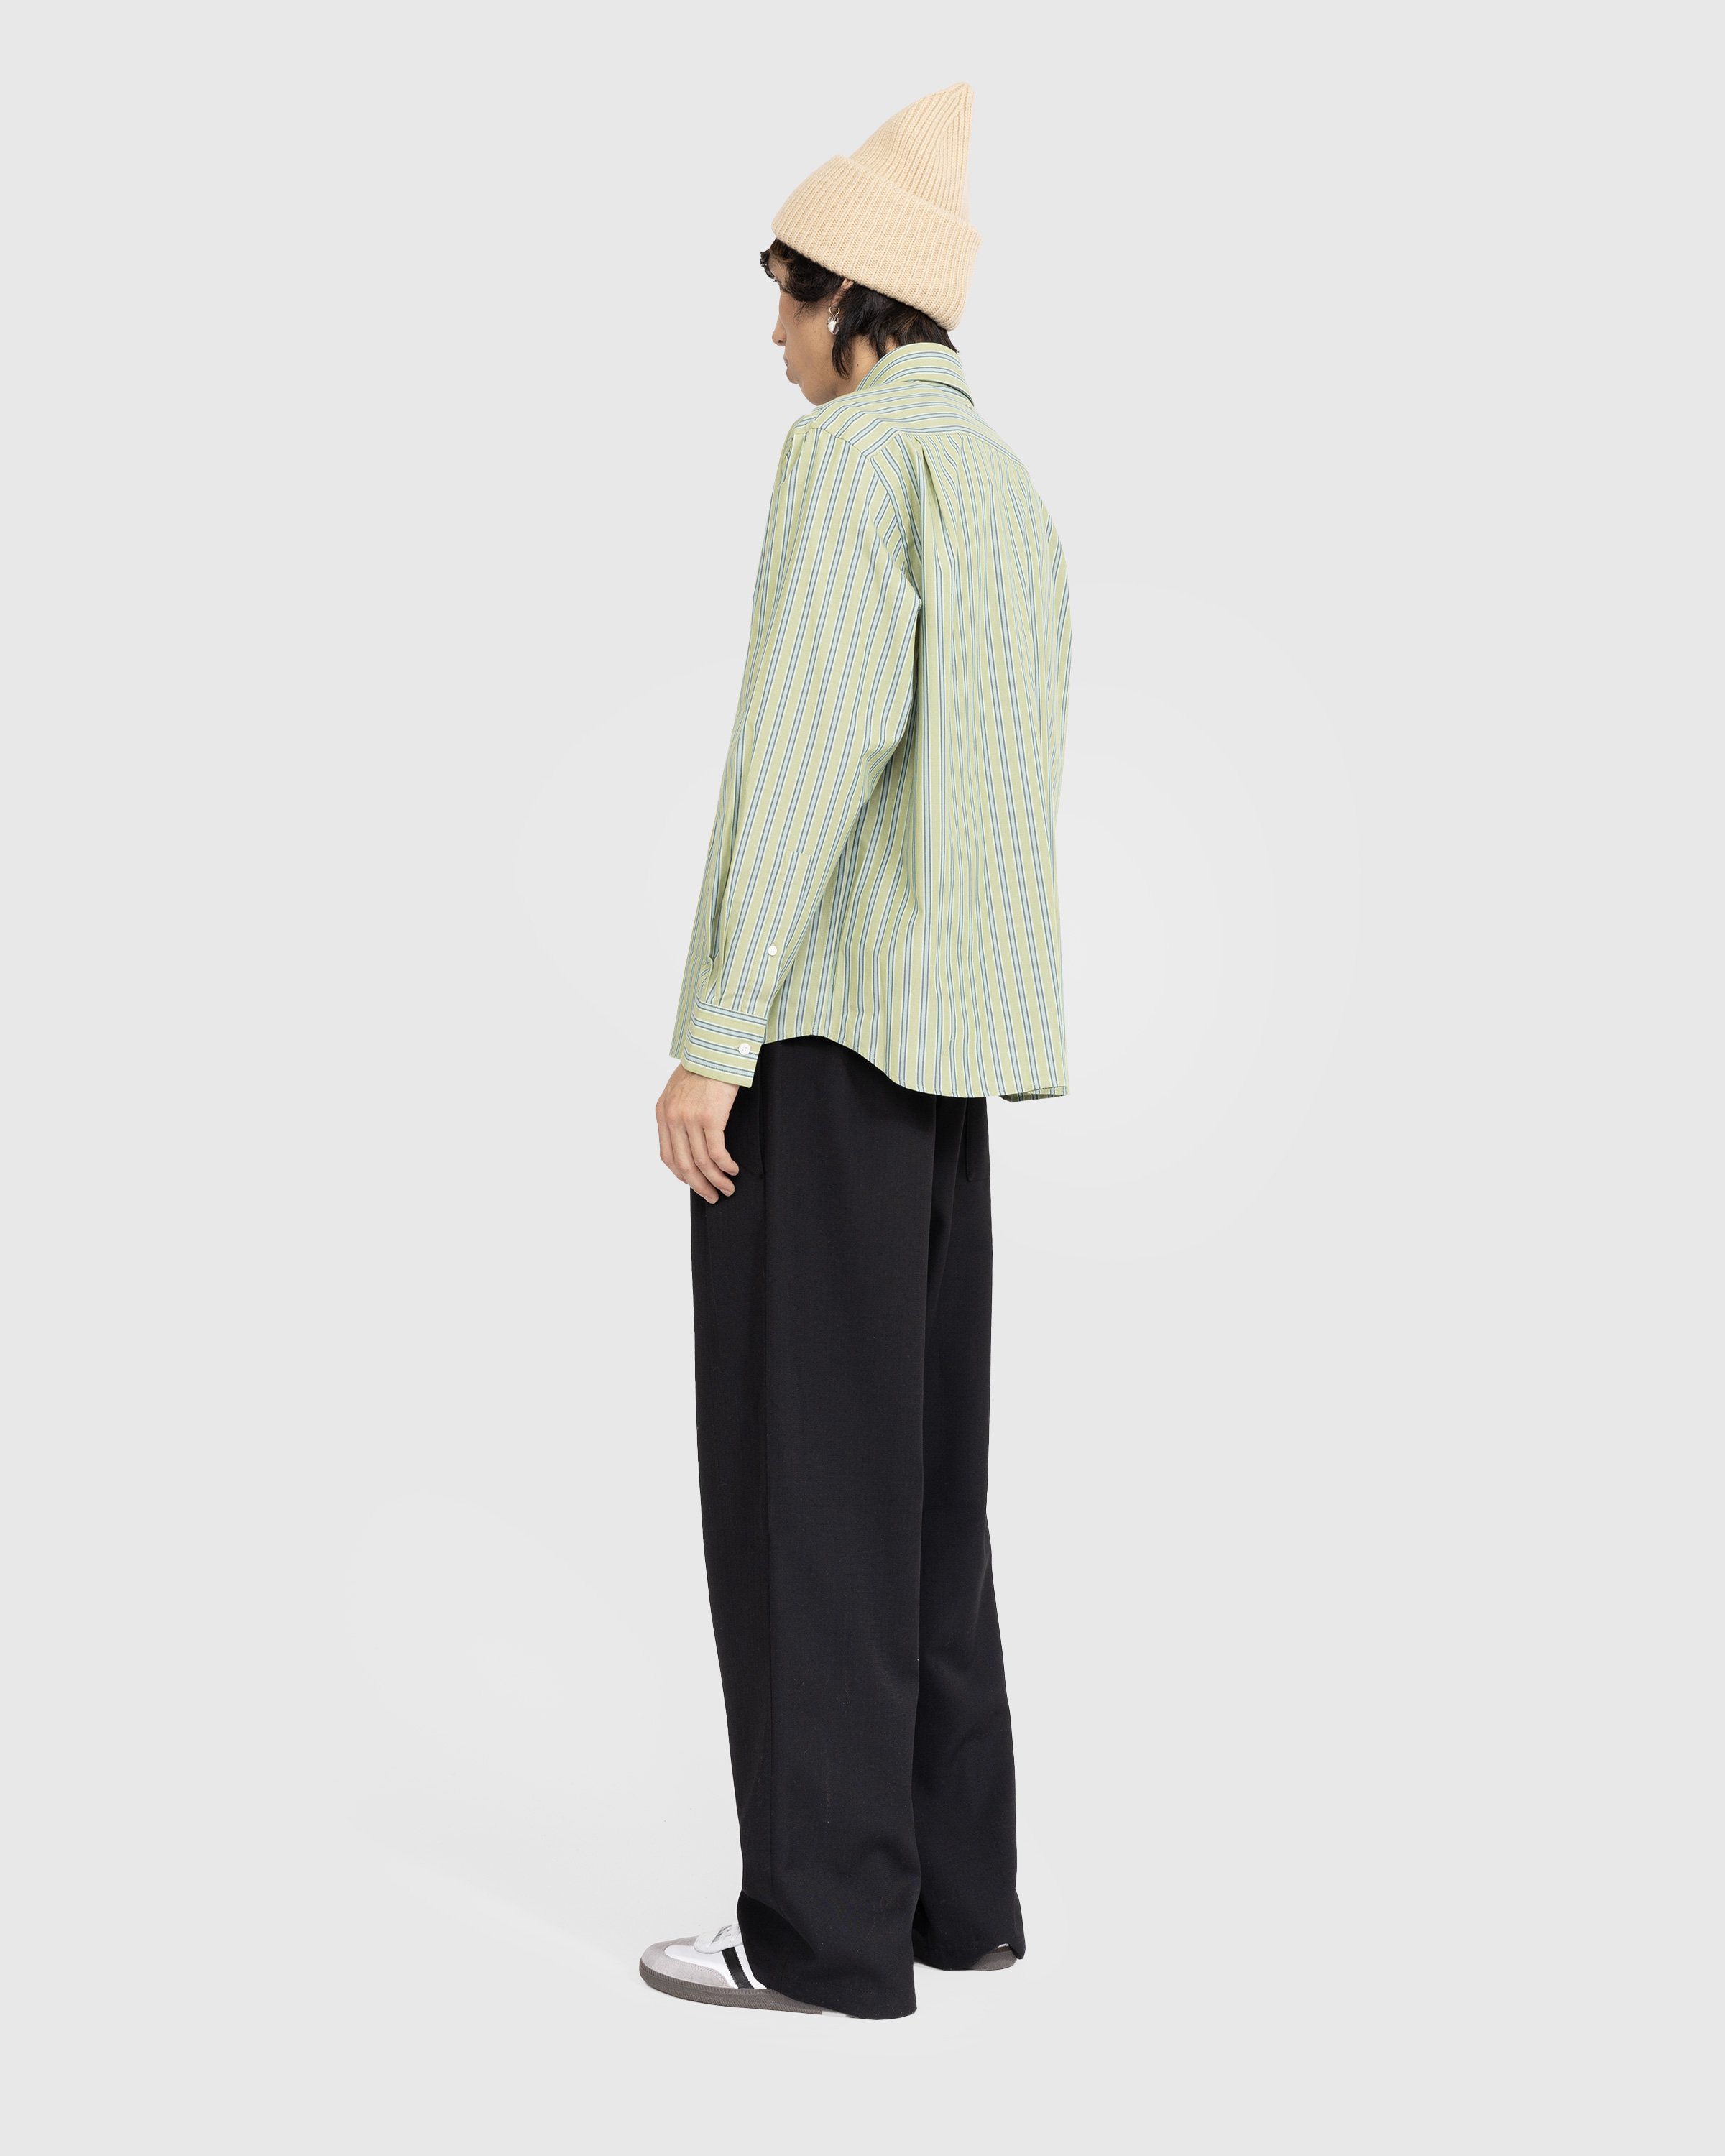 Acne Studios - Tailored Trousers Black - Clothing - Black - Image 4